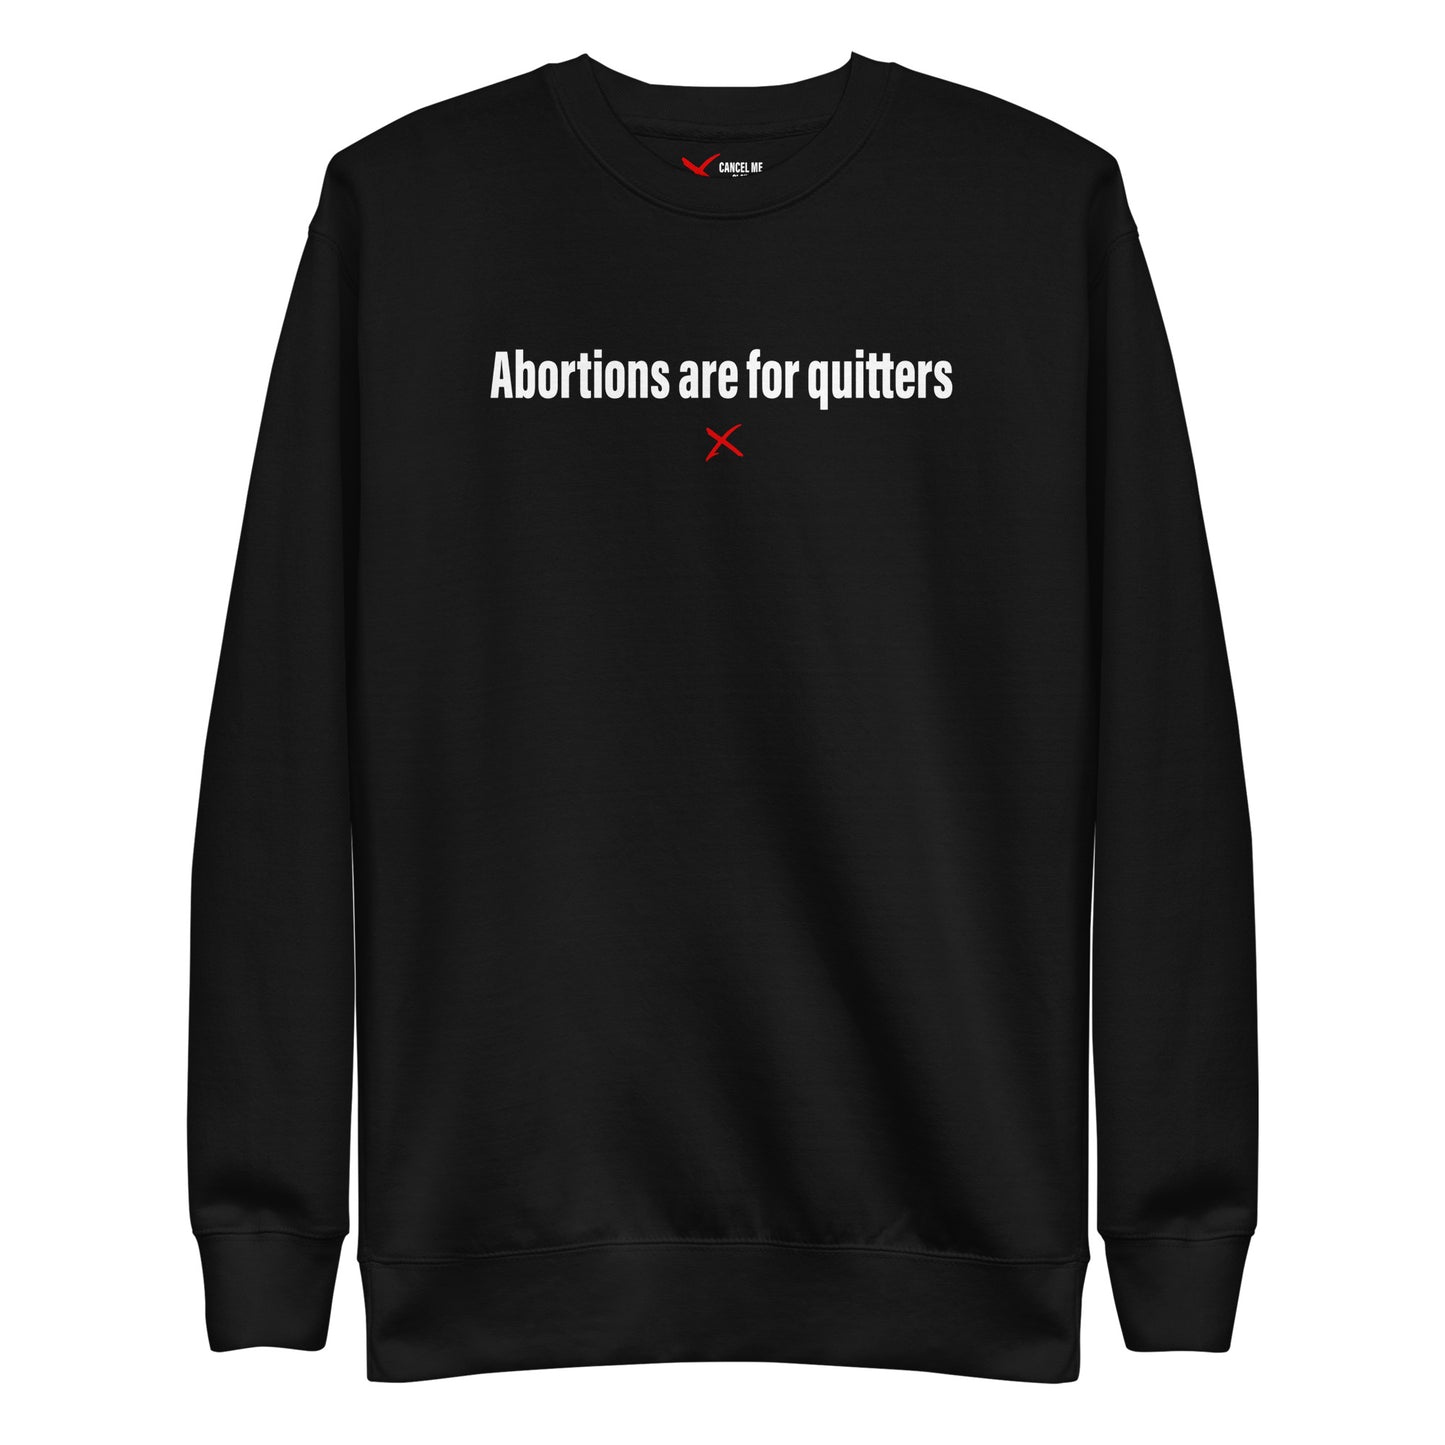 Abortions are for quitters - Sweatshirt